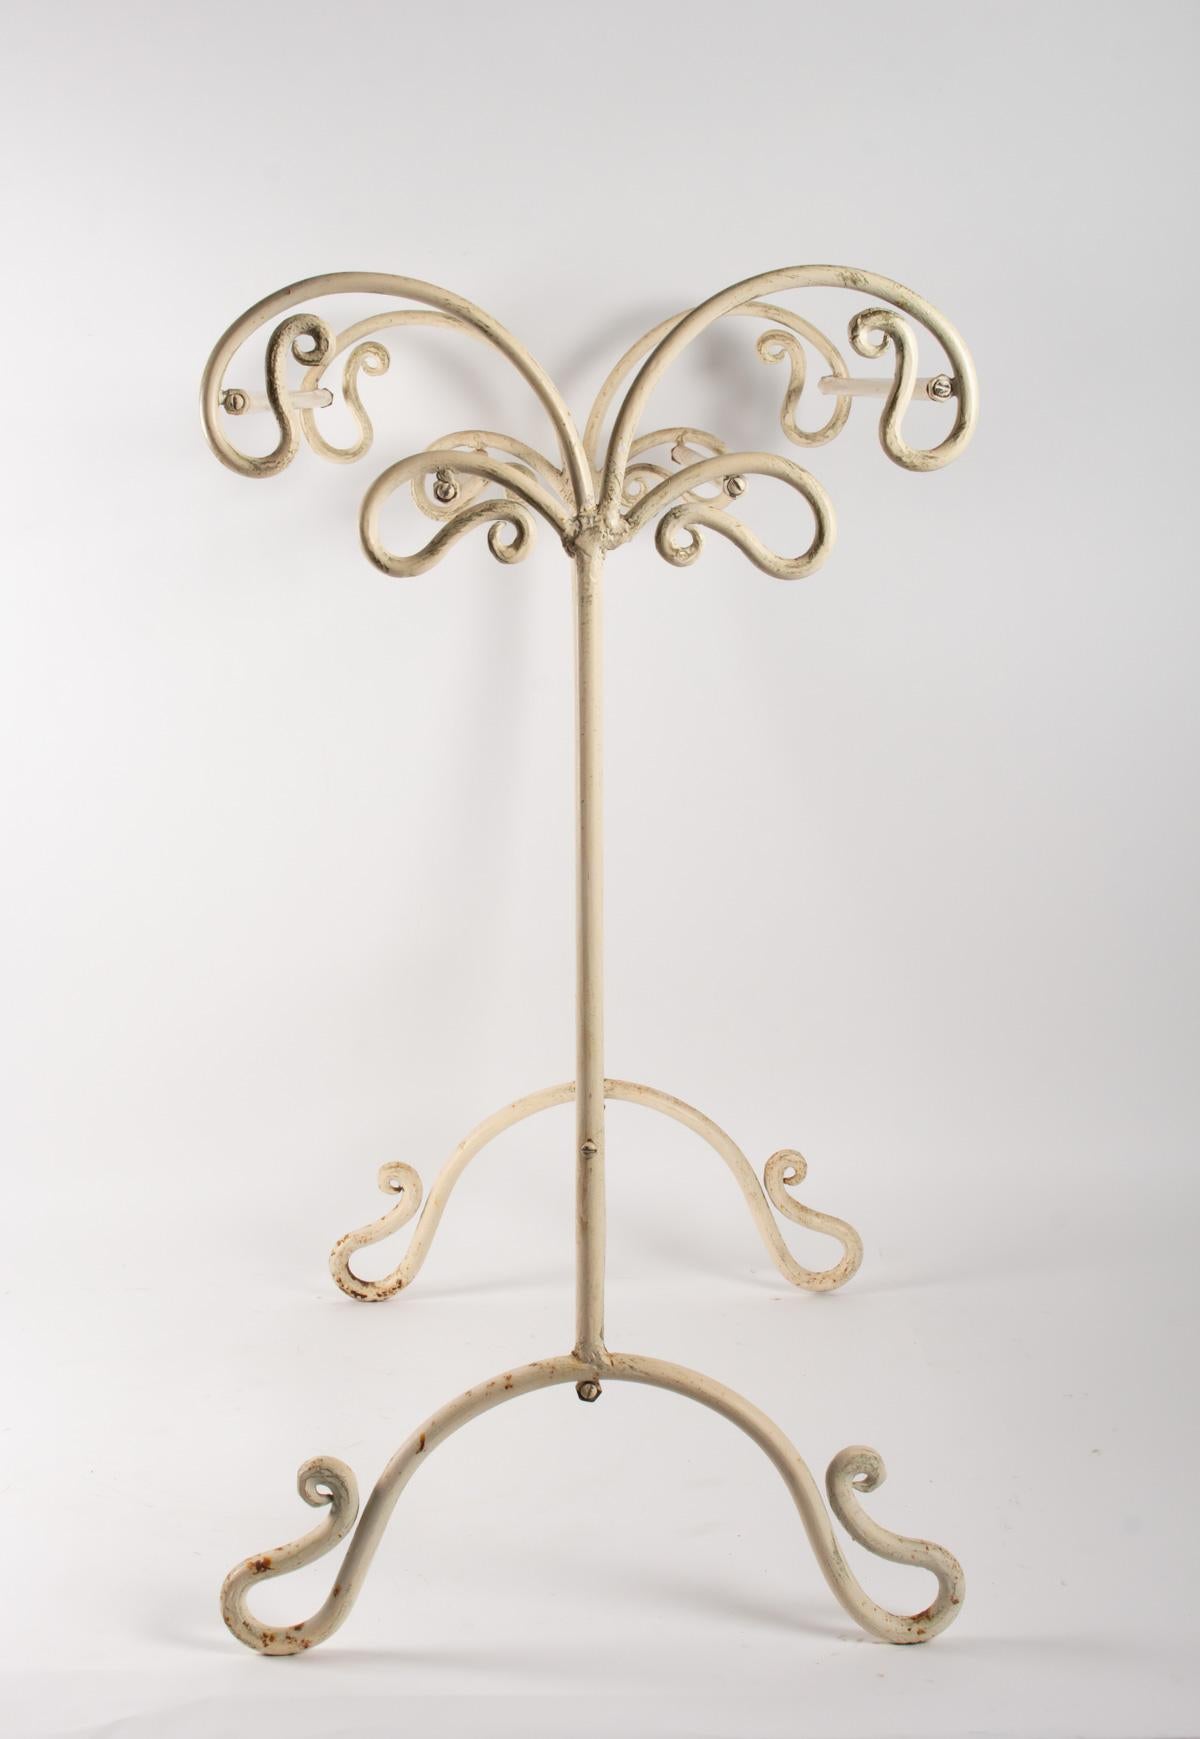 Art Nouveau Wrought Iron Towel Bar from the Beginning of the 20th Century Style, 1900-1920